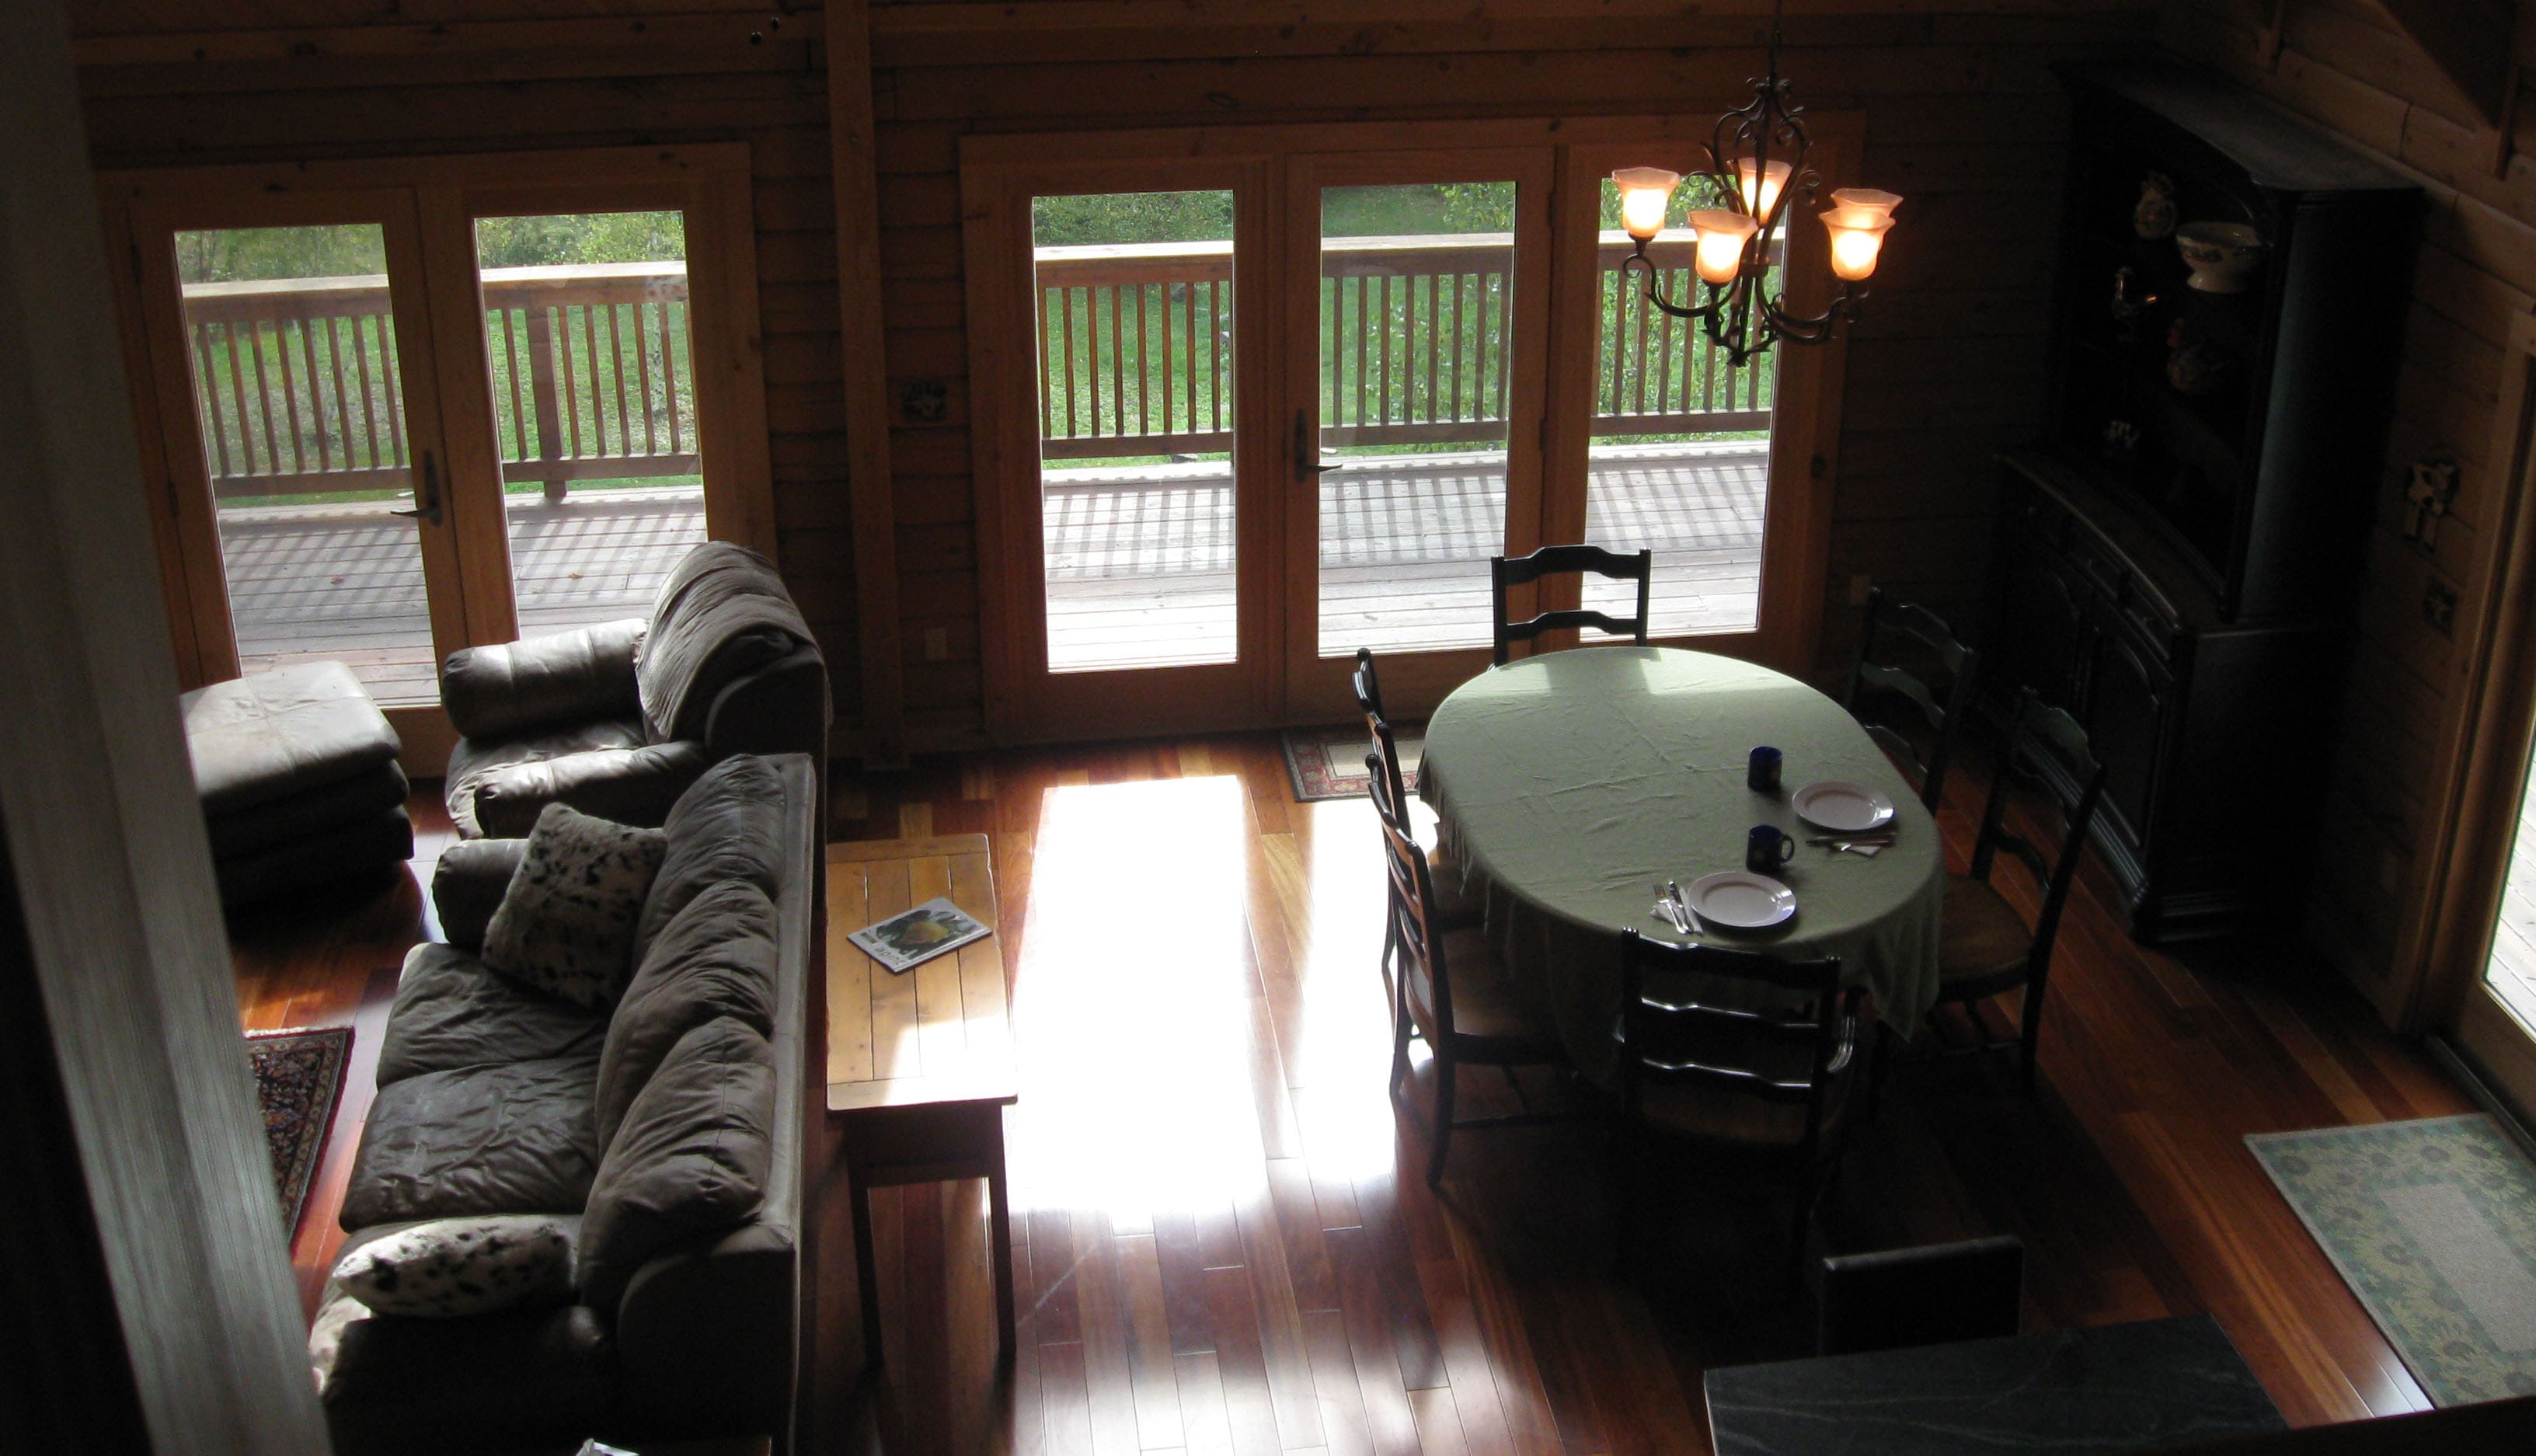 View from the balcony to the living area.